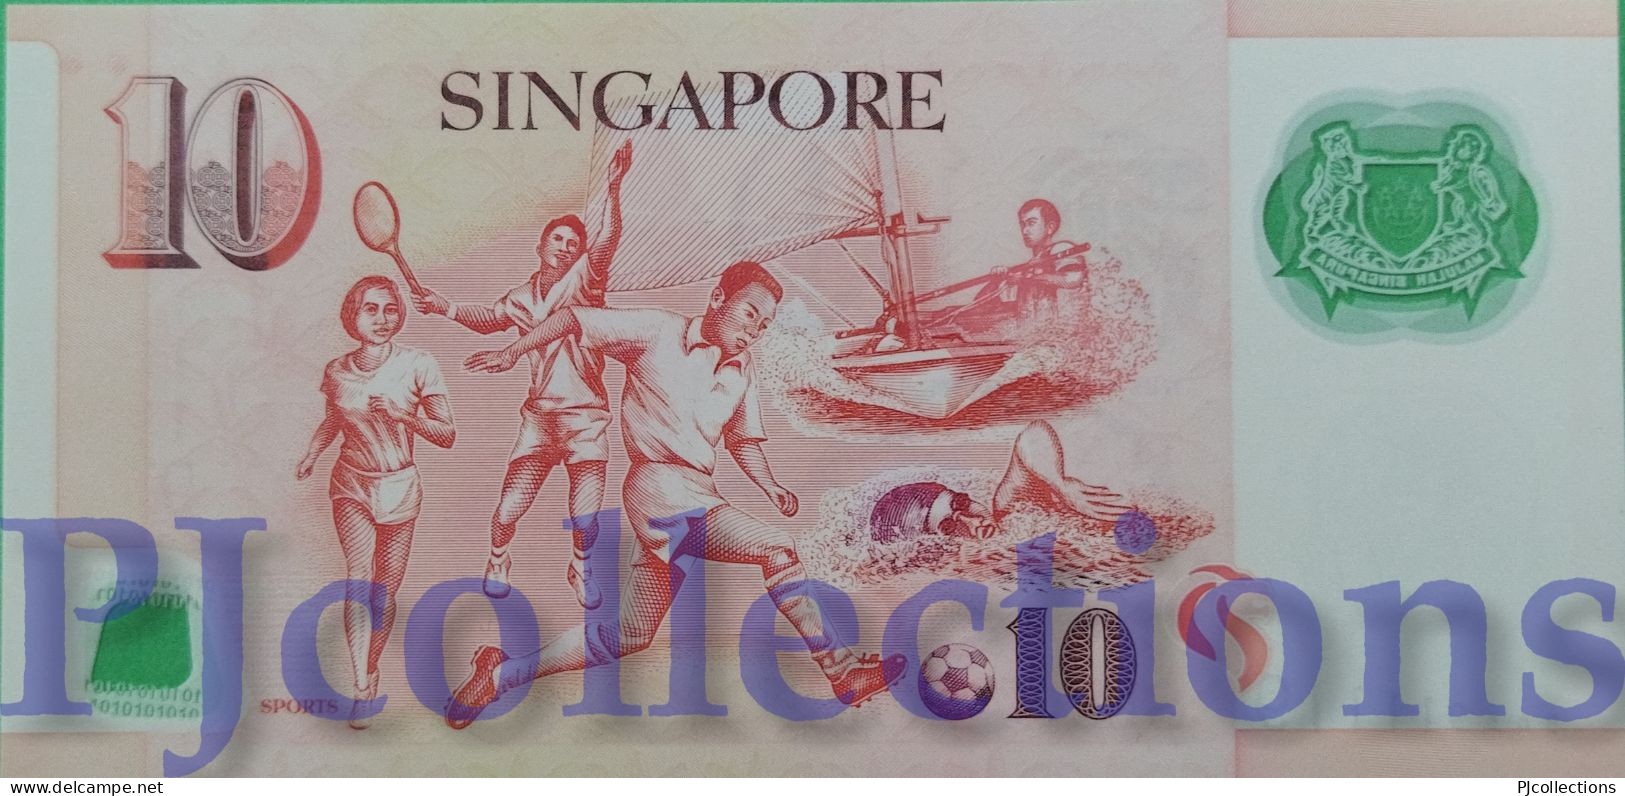 SINGAPORE 10 DOLLARS 2005 PICK 48a POLYMER UNC GOOD SERIAL NUMBER "9AA 911119" - Singapore